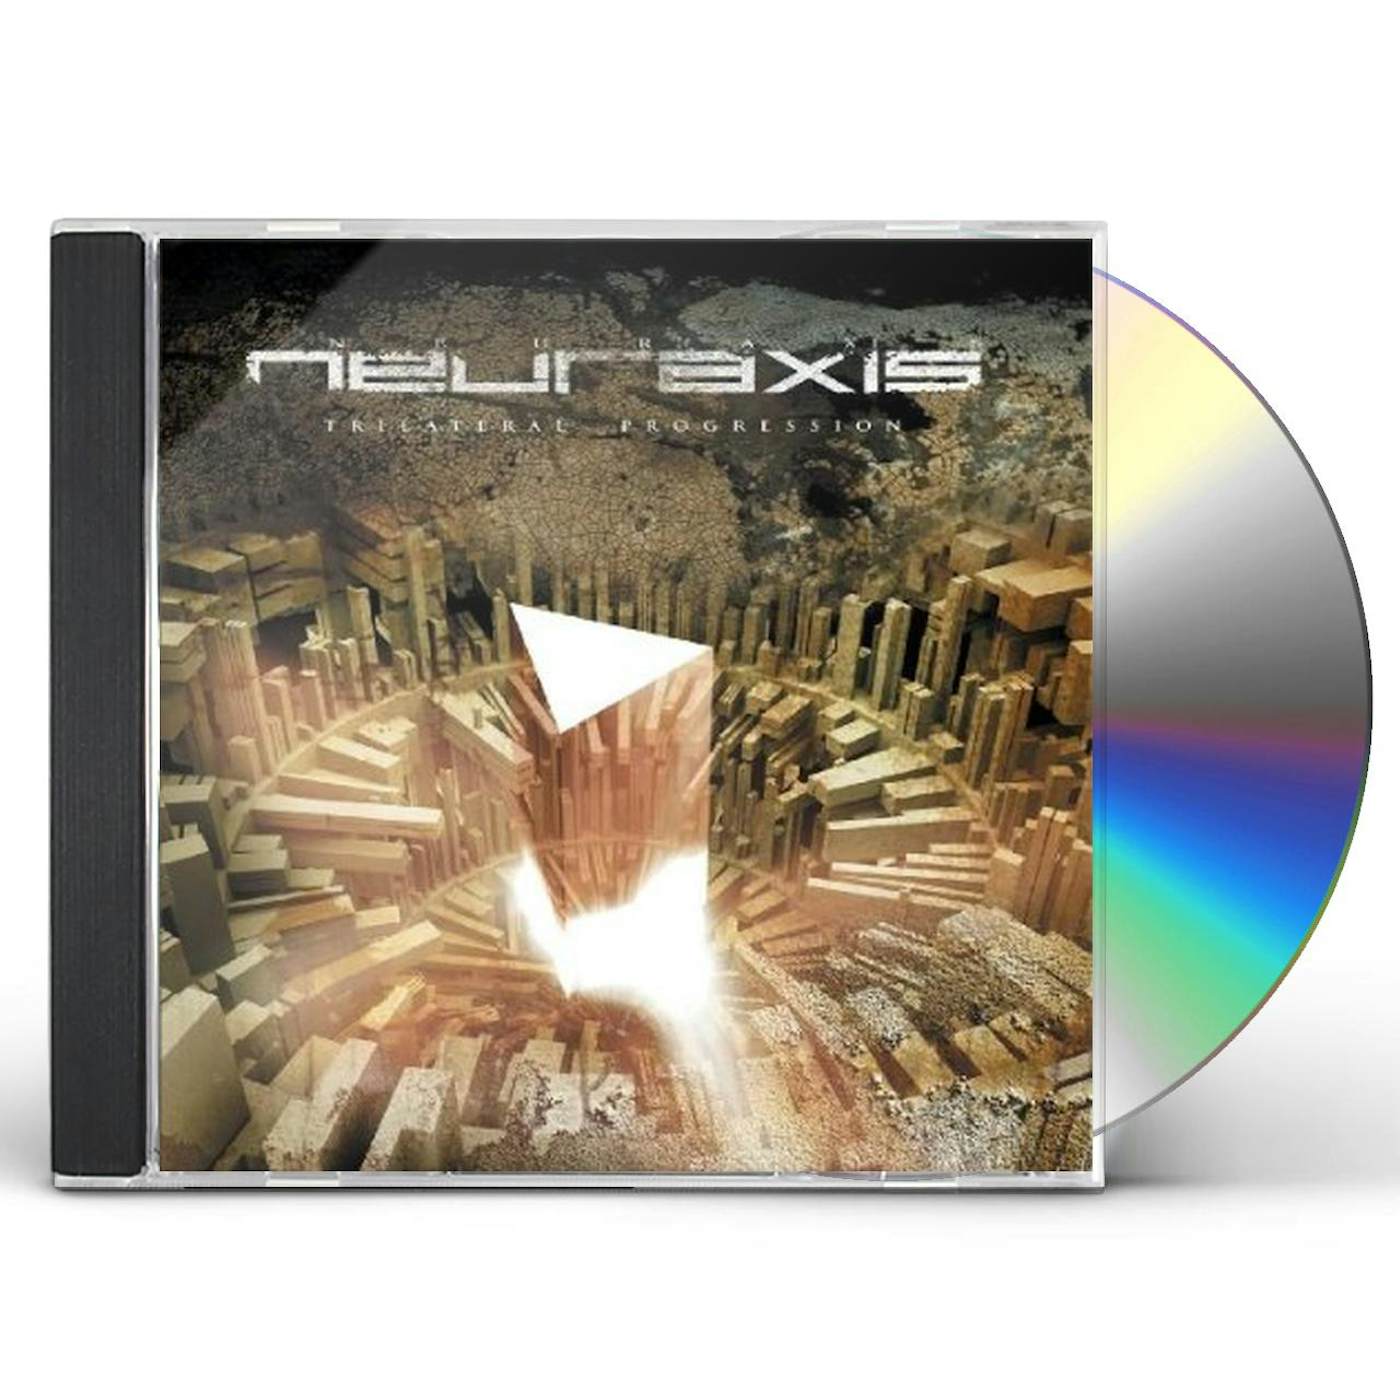 Neuraxis TRILATERAL PROGRESSION CD